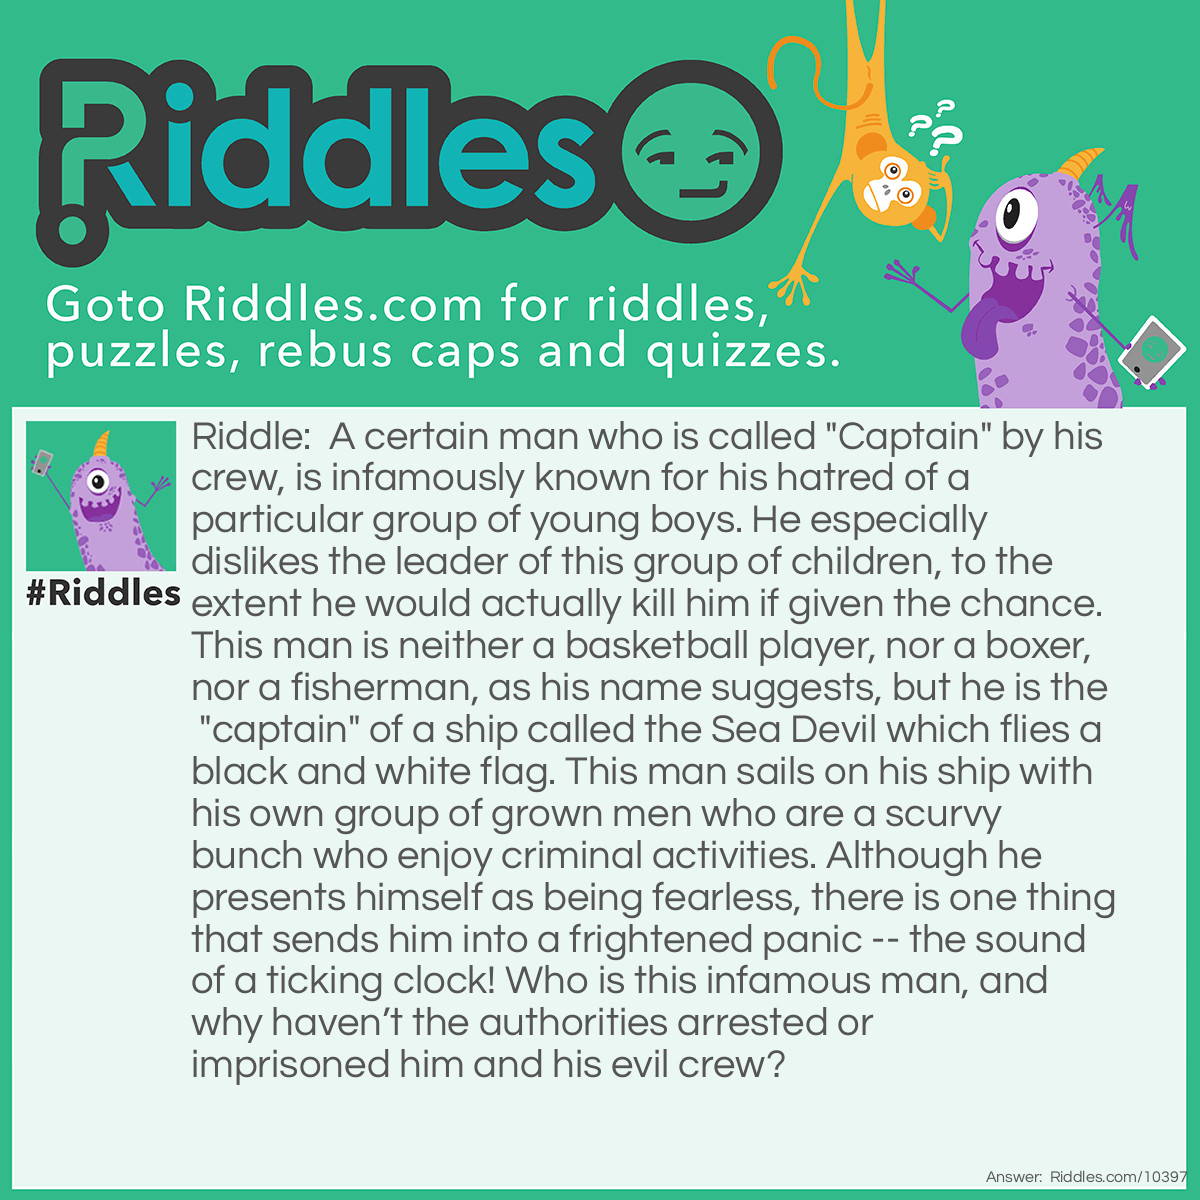 Riddle: A certain man who is called "Captain" by his crew, is infamously known for his hatred of a particular group of young boys. He especially dislikes the leader of this group of children, to the extent he would actually kill him if given the chance. This man is neither a basketball player, nor a boxer, nor a fisherman, as his name suggests, but he is the "captain" of a ship called the Sea Devil which flies a black and white flag. This man sails on his ship with his own group of grown men who are a scurvy bunch who enjoy criminal activities. Although he presents himself as being fearless, there is one thing that sends him into a frightened panic -- the sound of a ticking clock! Who is this infamous man, and why haven’t the authorities arrested or imprisoned him and his evil crew? Answer: The infamous man is Captain Hook, the arch-enemy of Peter Pan and the lost boys. He fears the loud ticking of a clock which a monstrous crocodile swallowed at some point before Peter Pan cut off the captain’s hand during battle, and fed the hand to the beast. The clock now resides in the crocodile’s stomach, and the ticking warns Captain Hook of the creature’s presence, as the crocodile wants to eat the rest of the tasty captain.